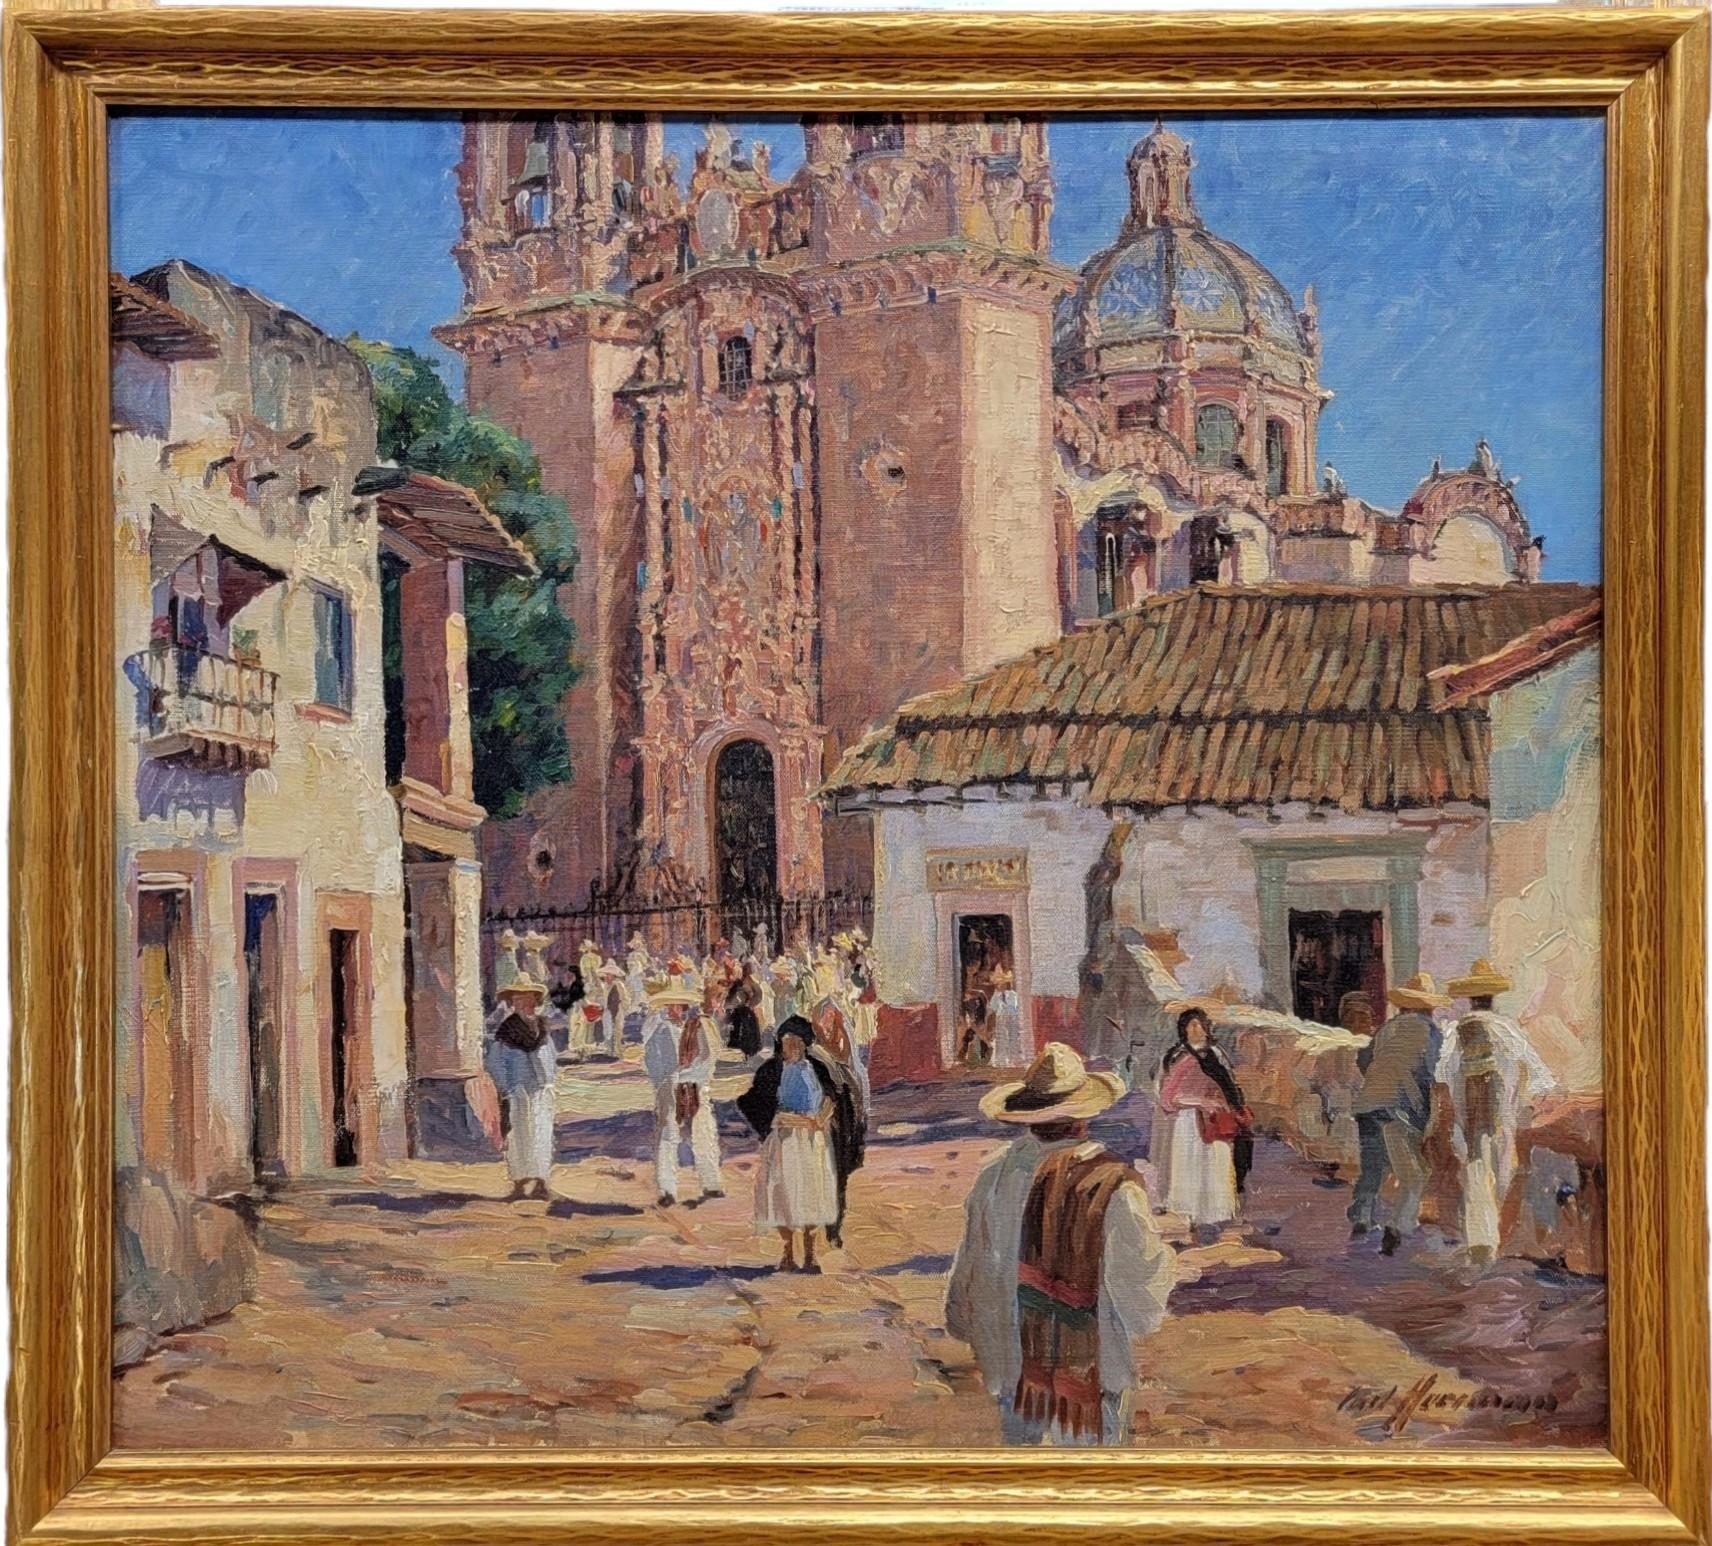 Carl Hoerman Landscape Painting - Feista, Taxco, Circa 1930s Original Oil Painting, Mexico